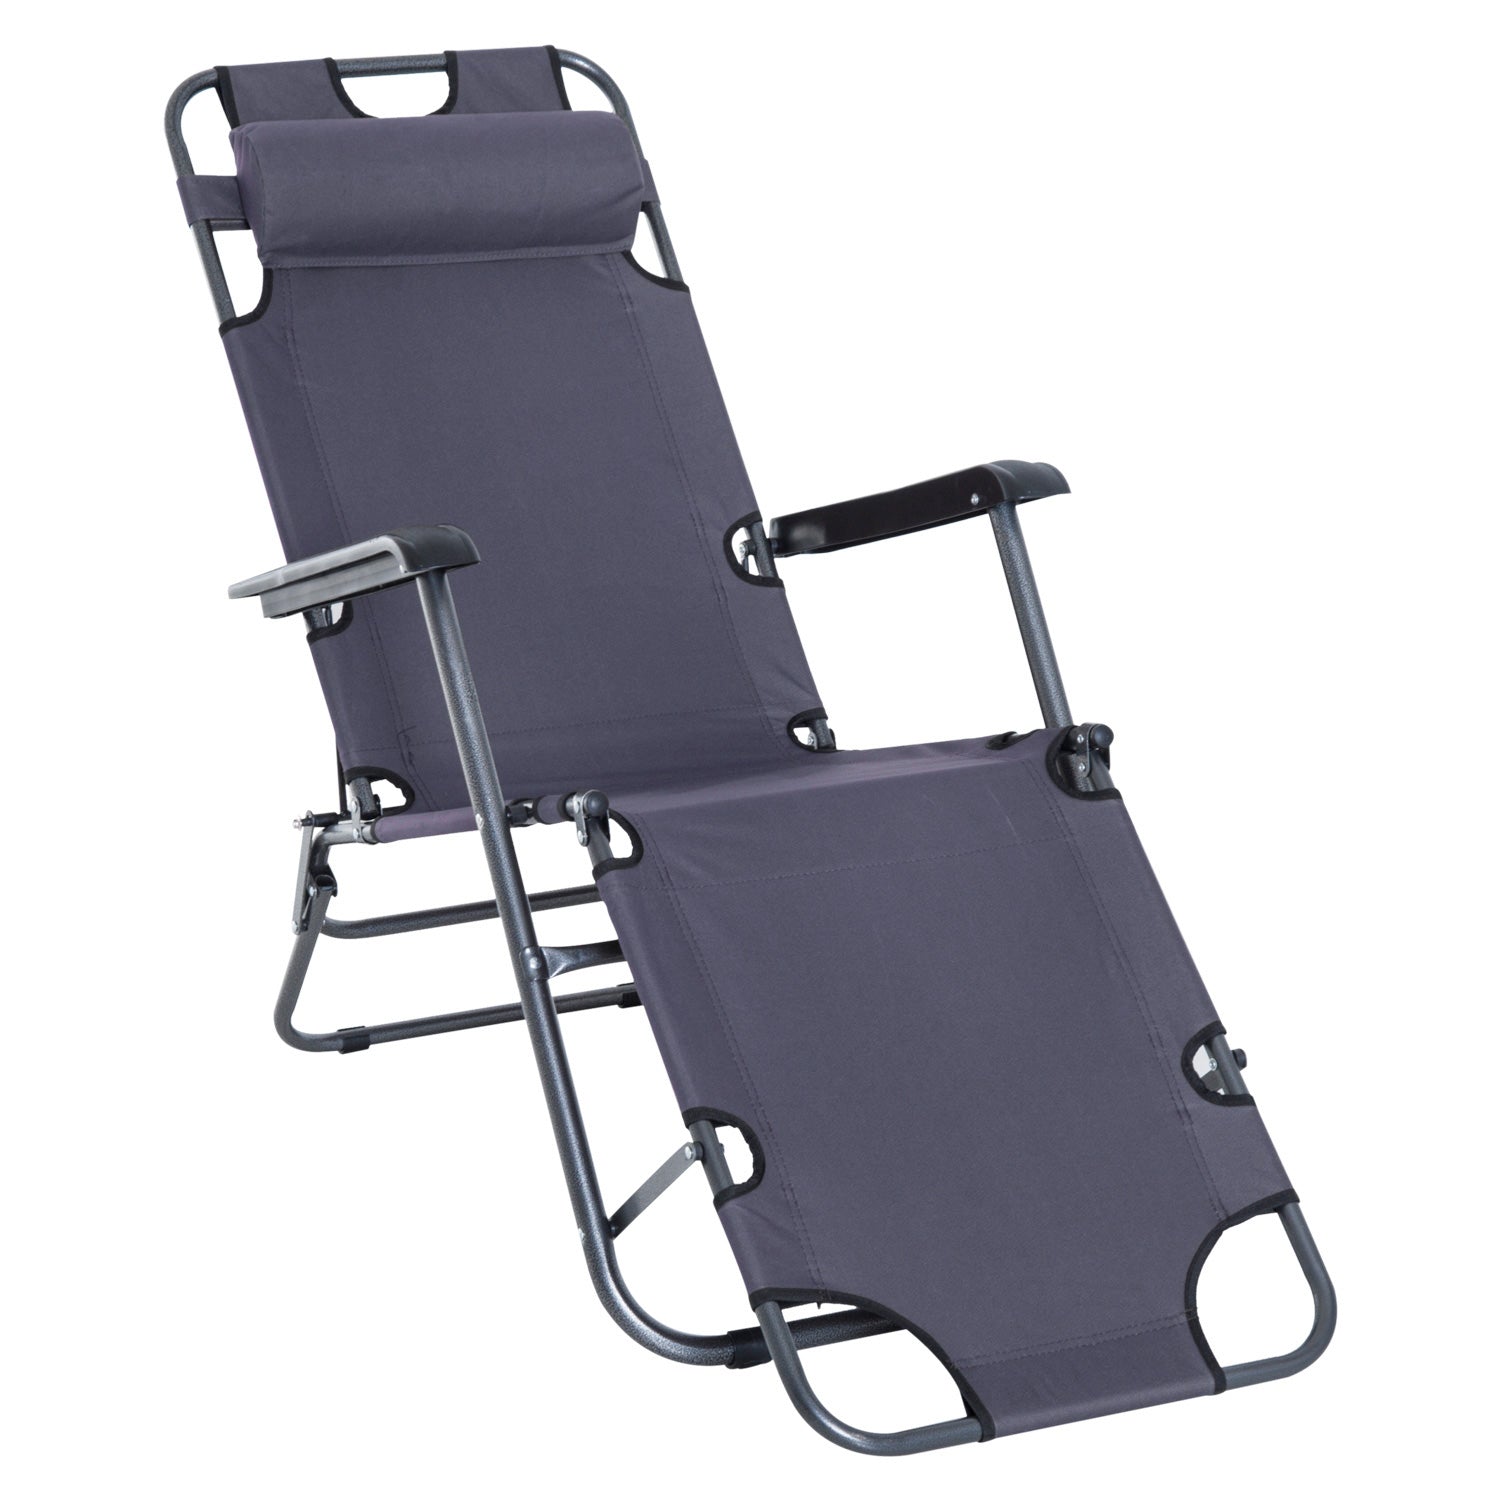 Outsunny 2 in 1 Outdoor Folding Sun Lounger w/ Adjustable Back and Pillow Grey  | TJ Hughes